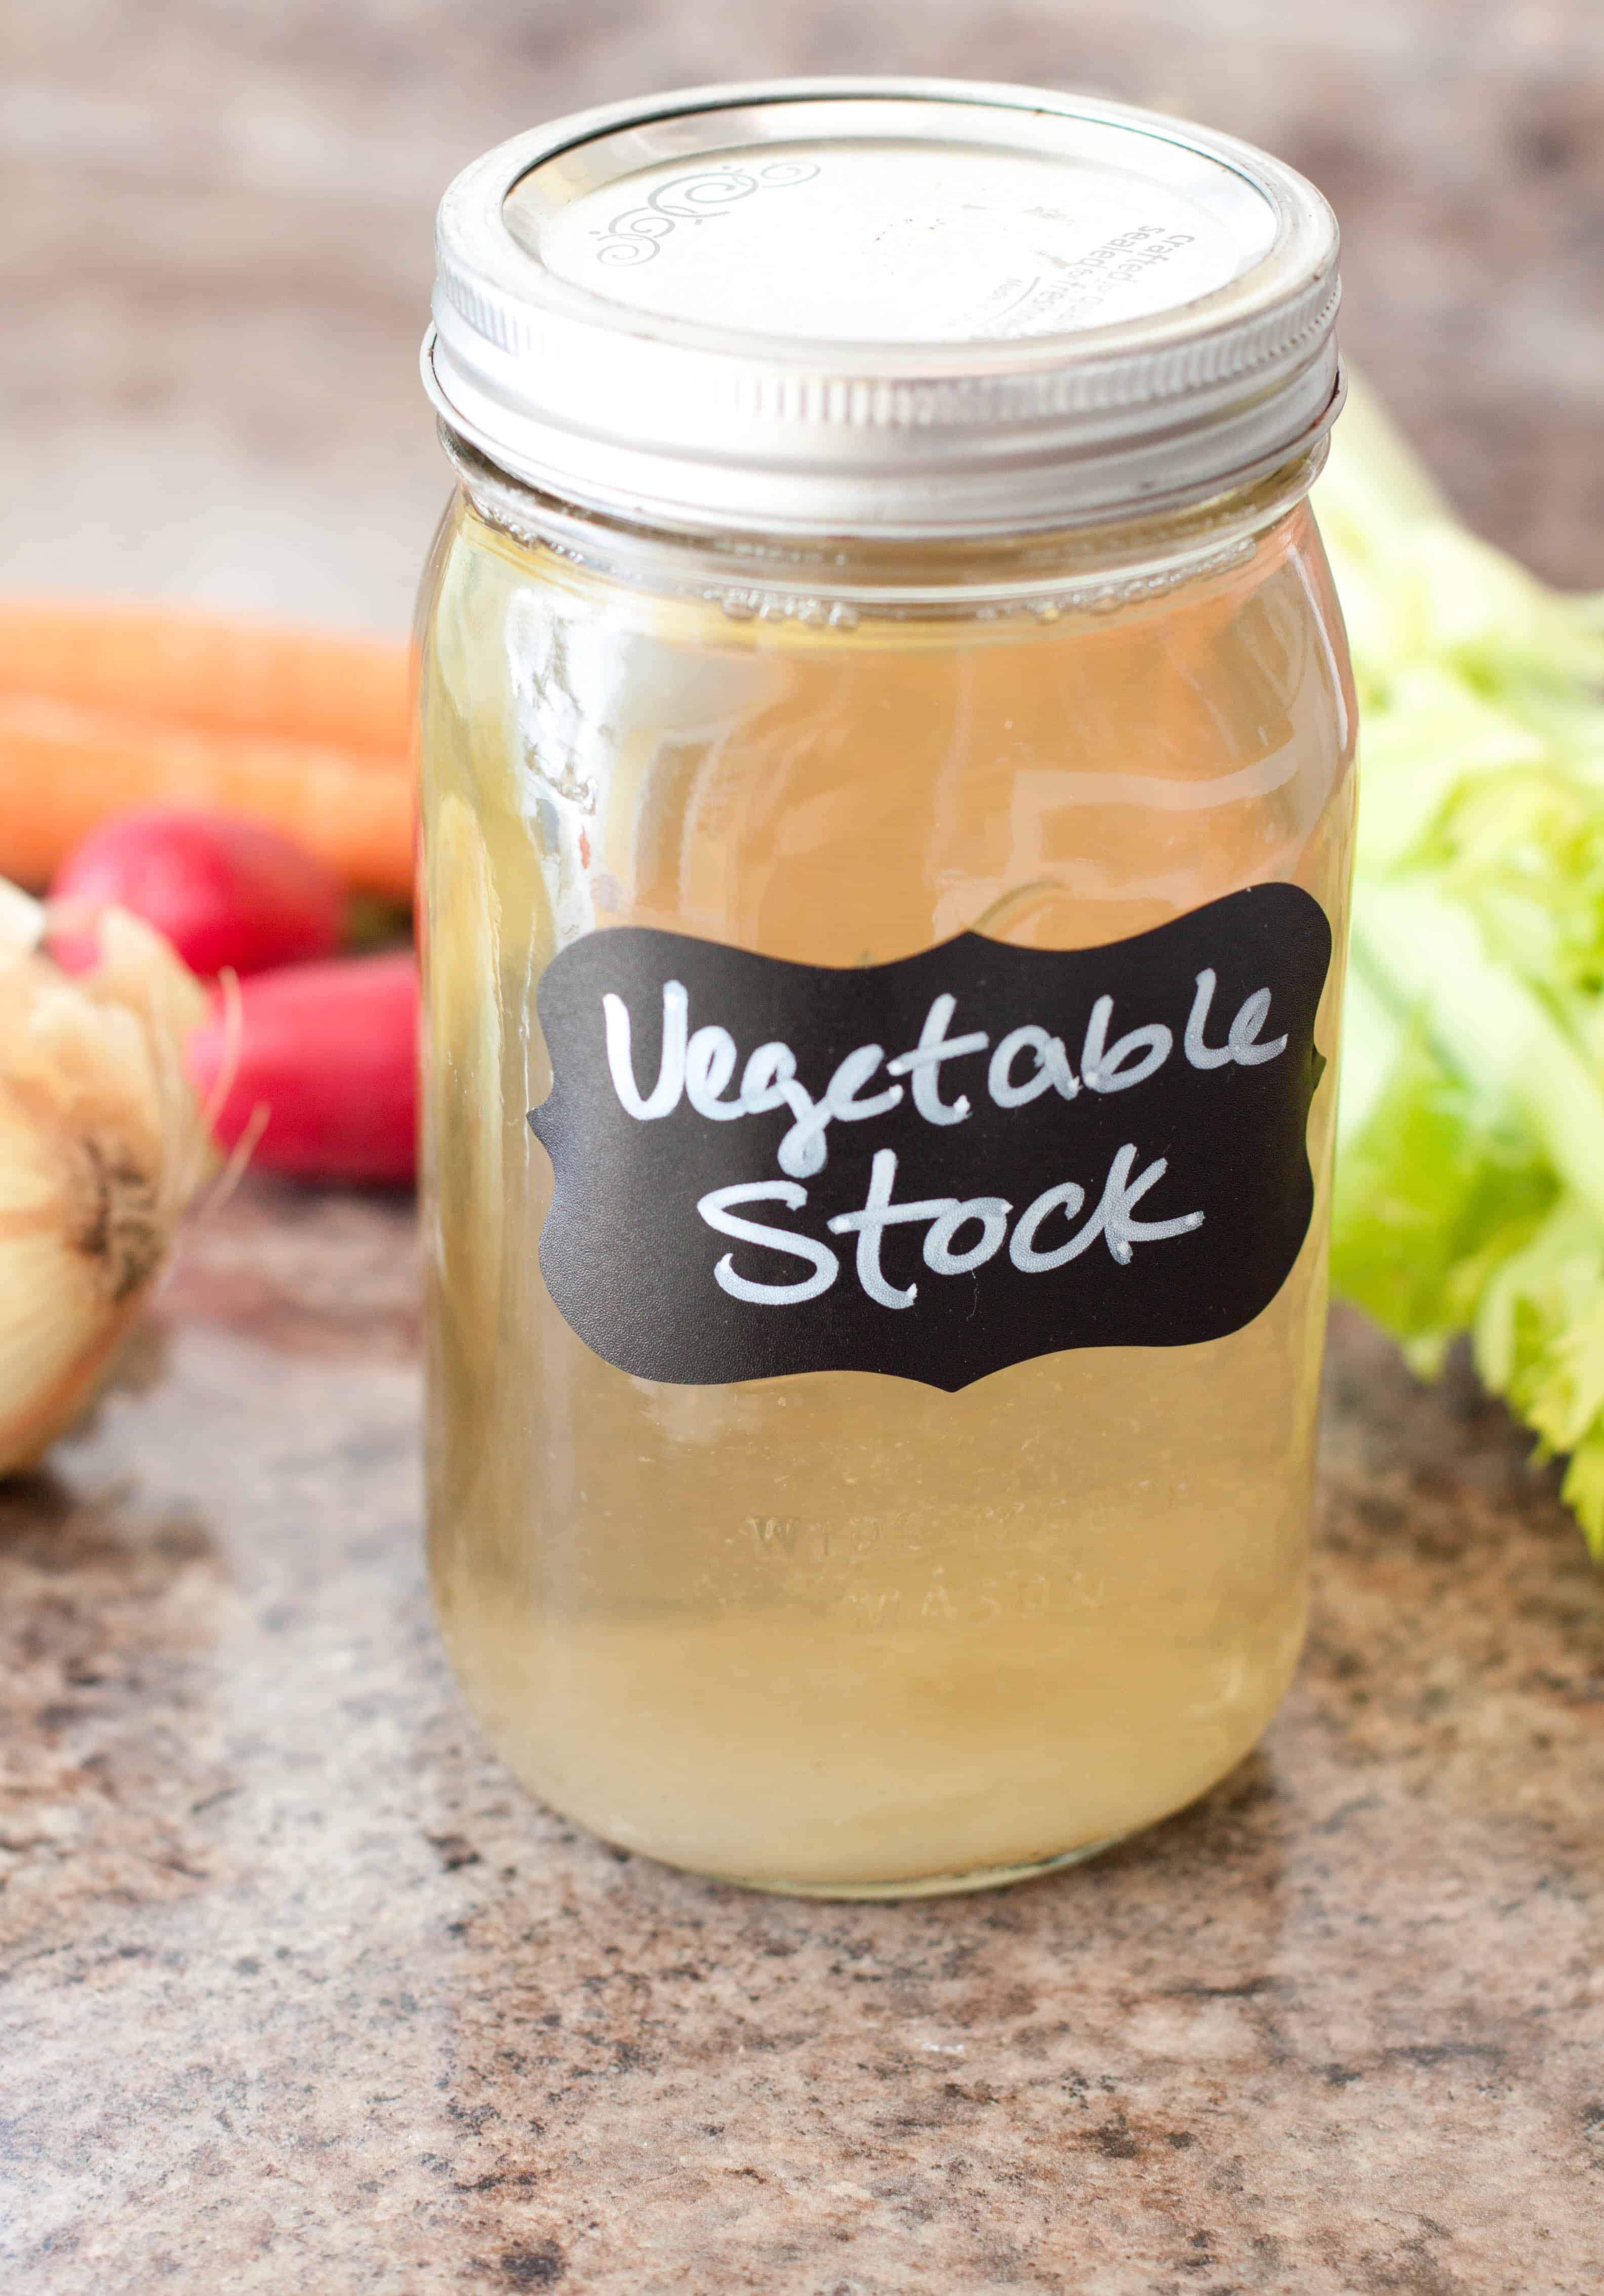 Don't throw away those past their prime or leftover veggies, get more mileage out of them by making your own Vegetable Stock from scratch!